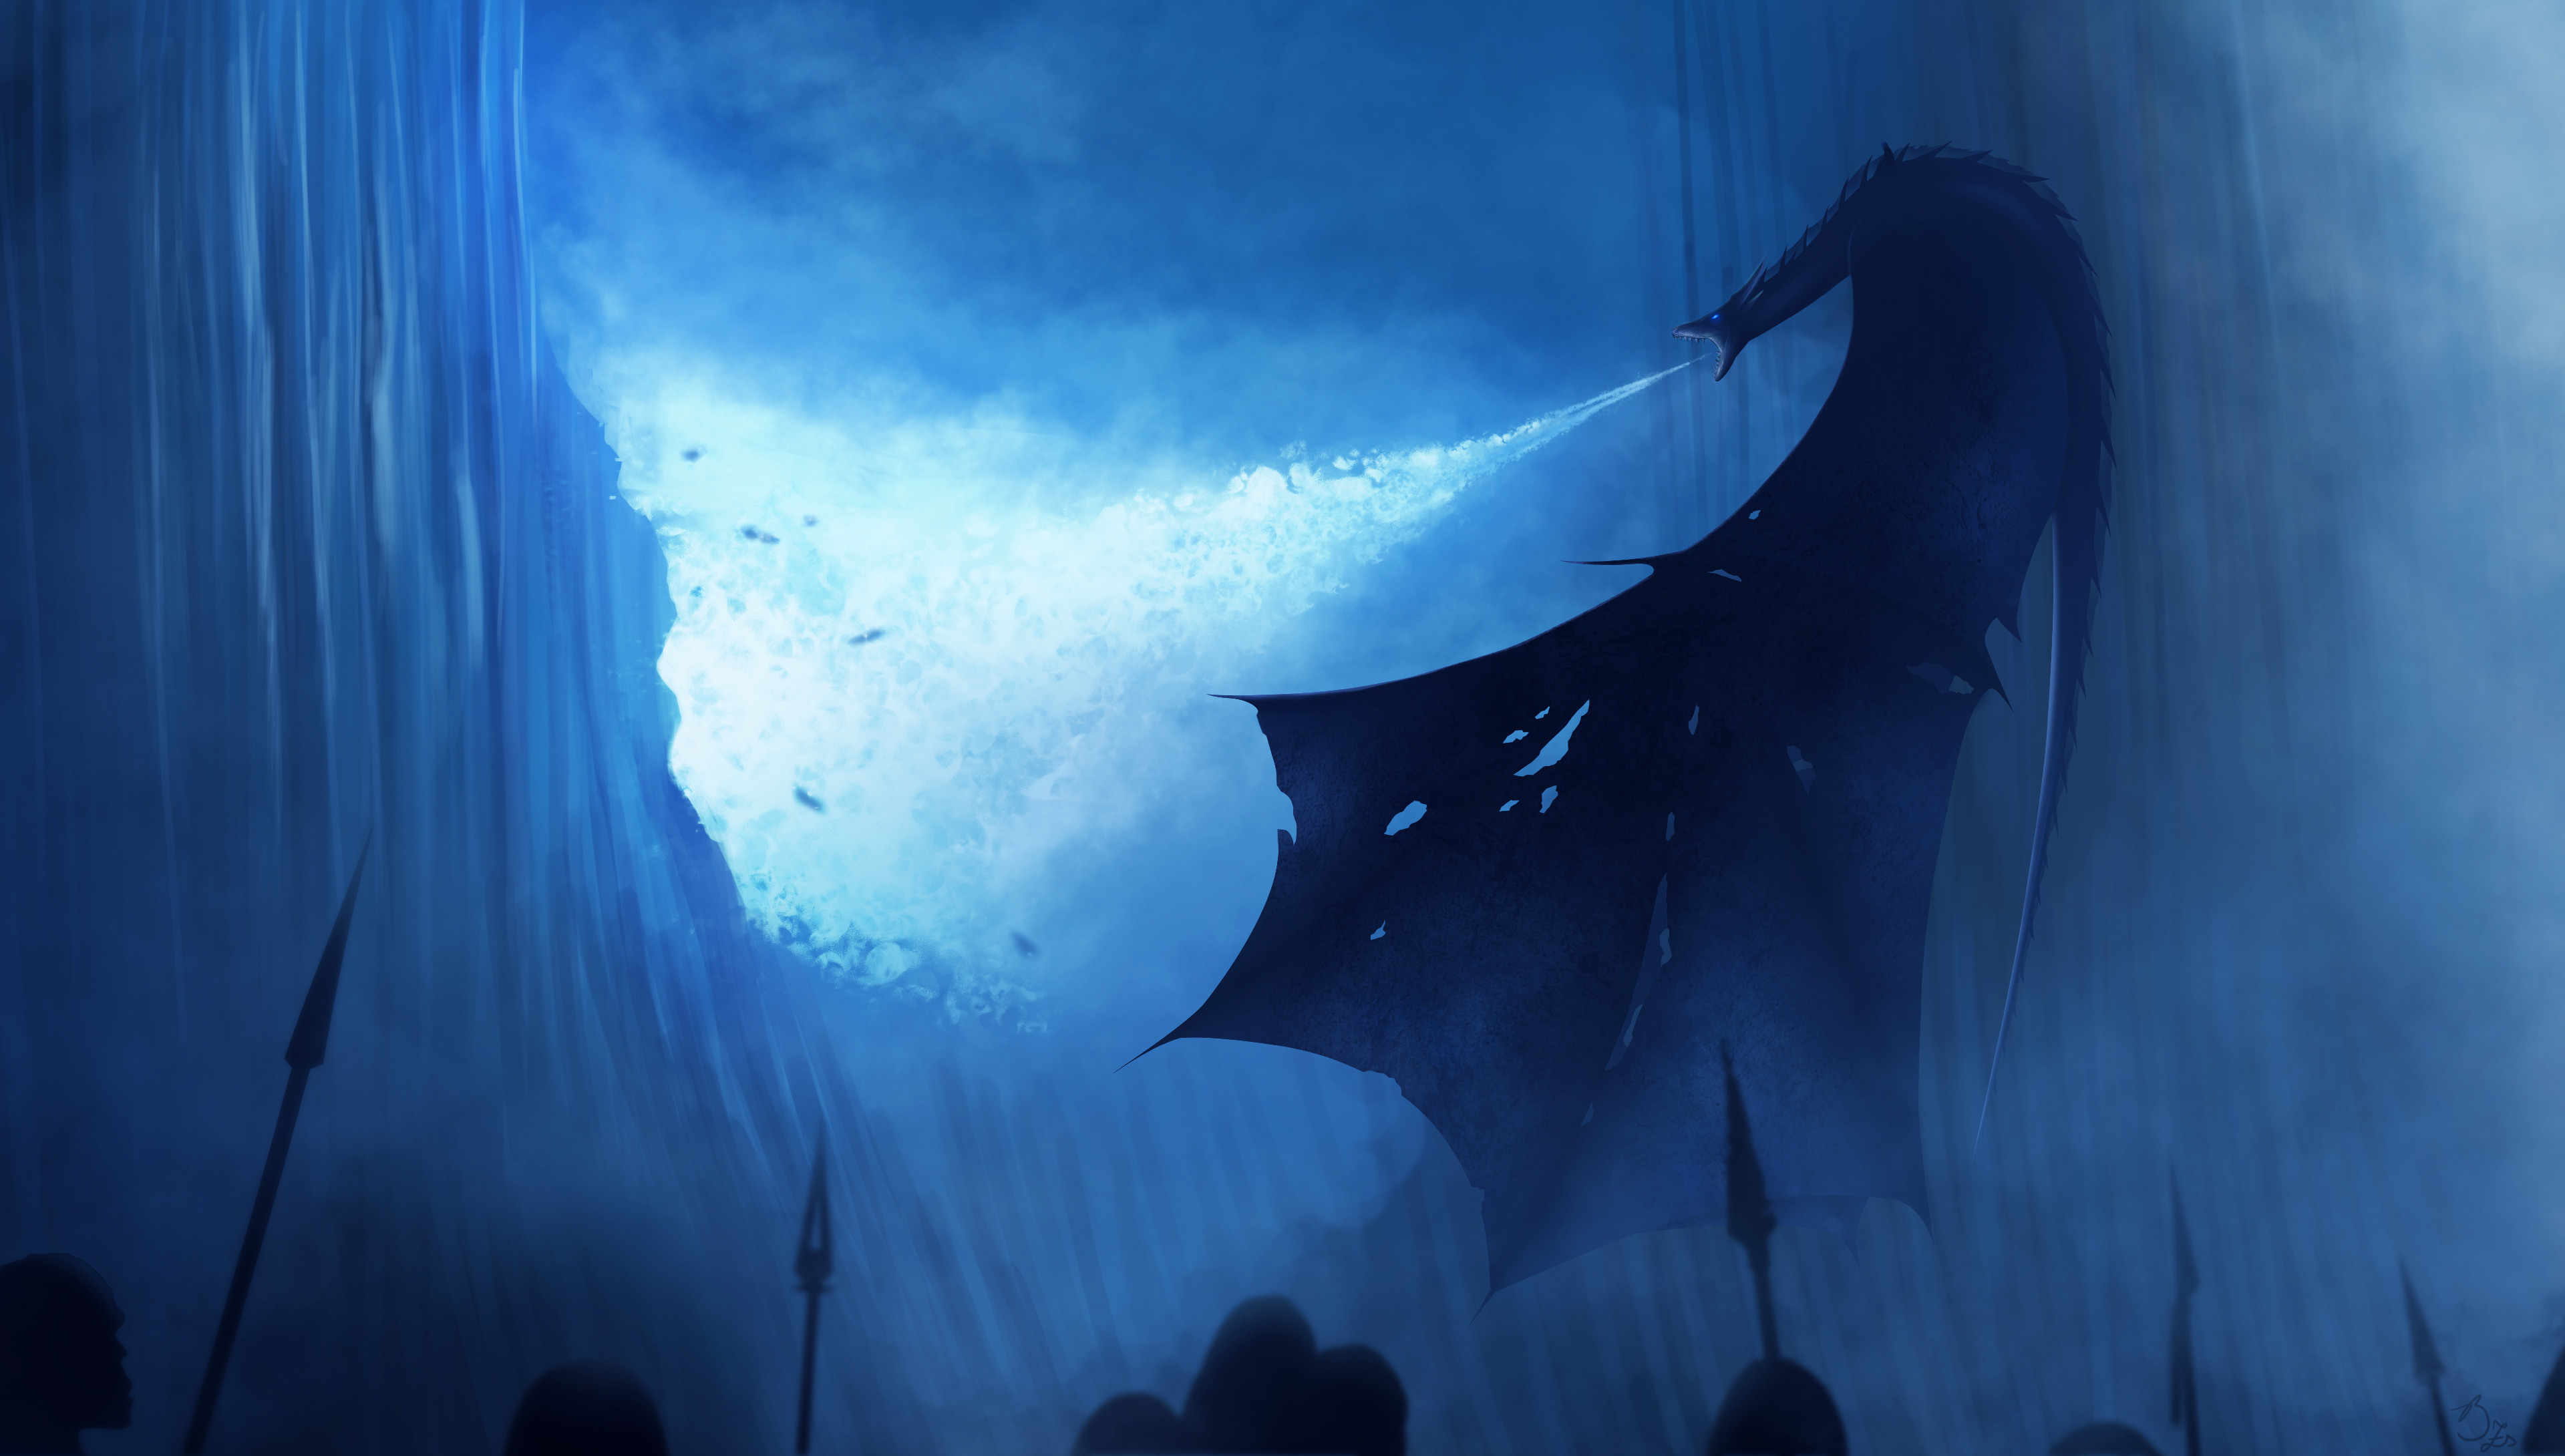 Windows Backgrounds game of thrones, dragon, tv show